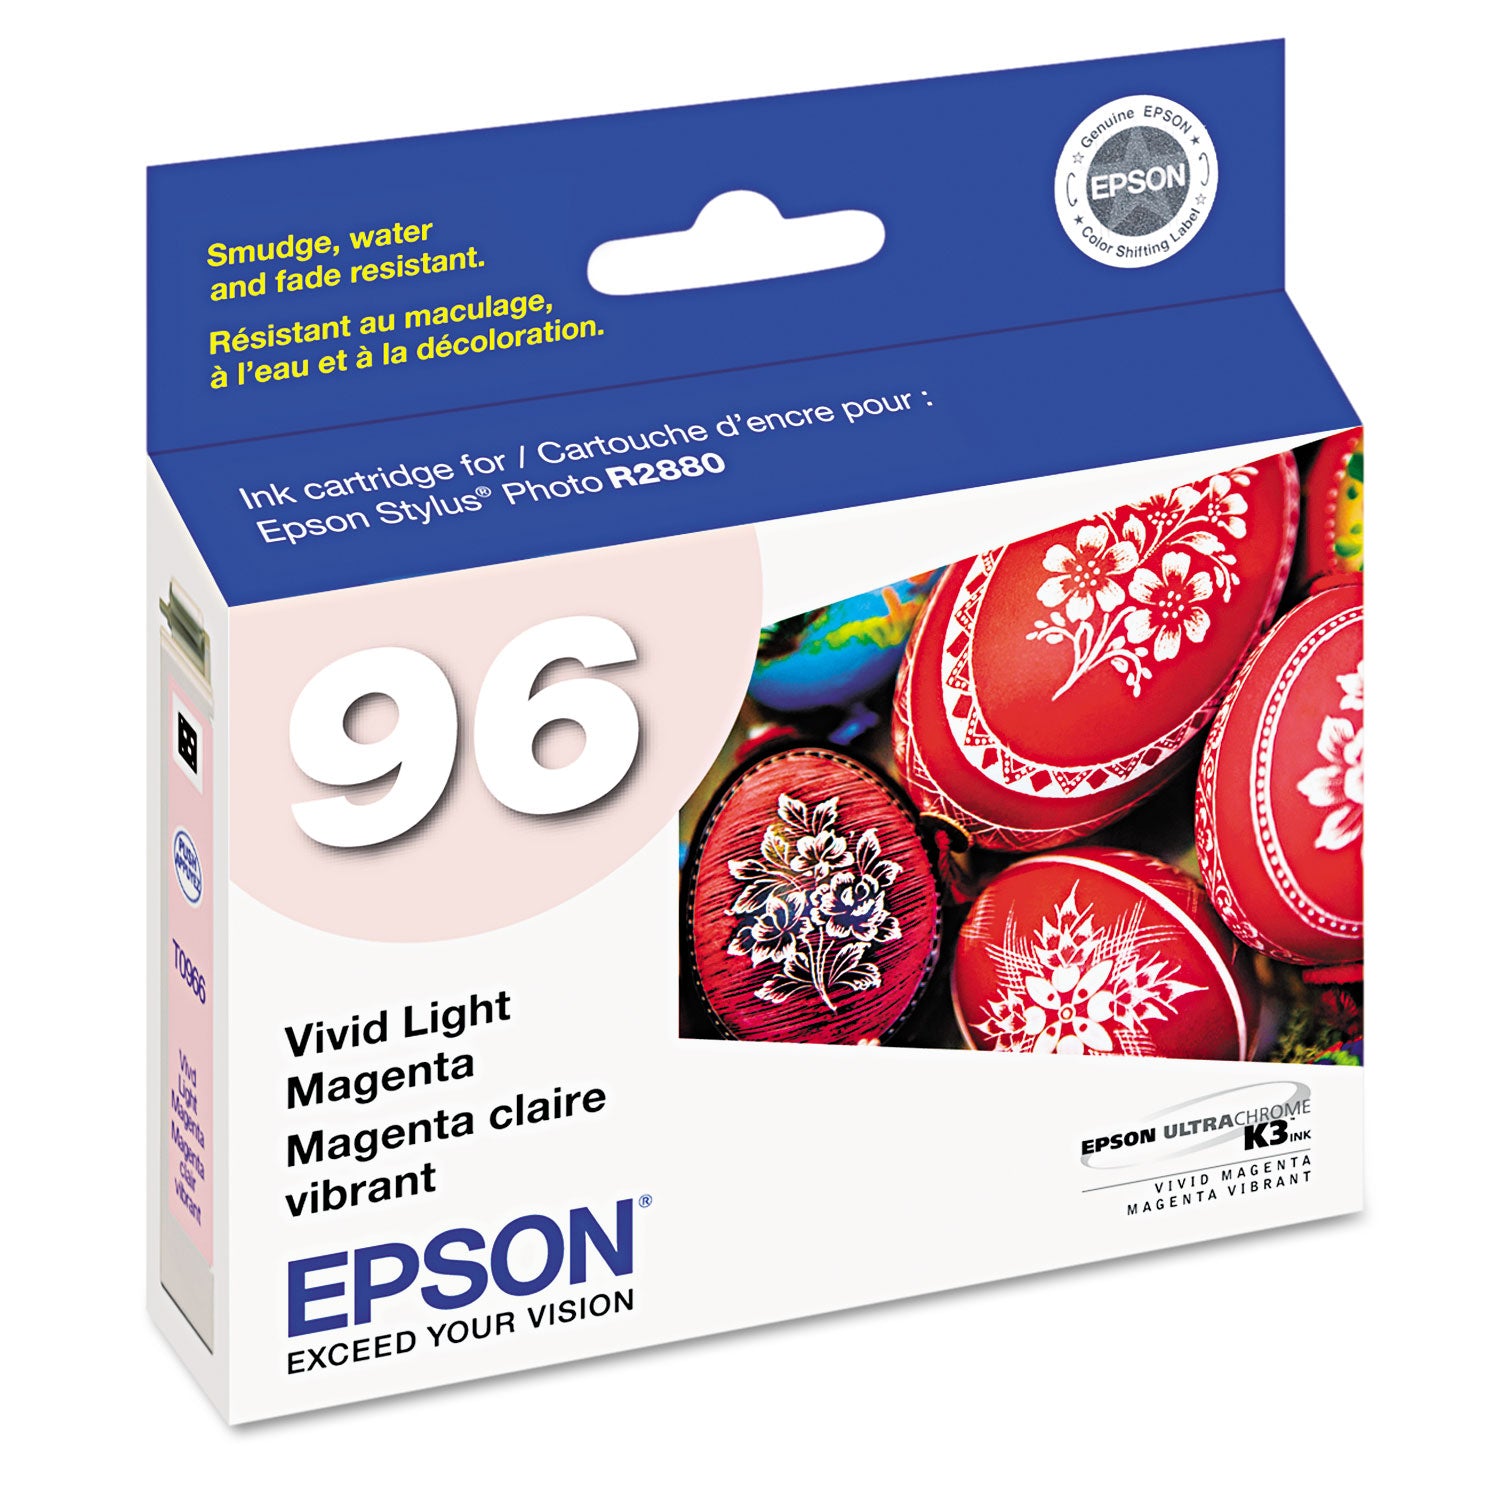 t096620-96-ink-450-page-yield-light-magenta_epst096620 - 1